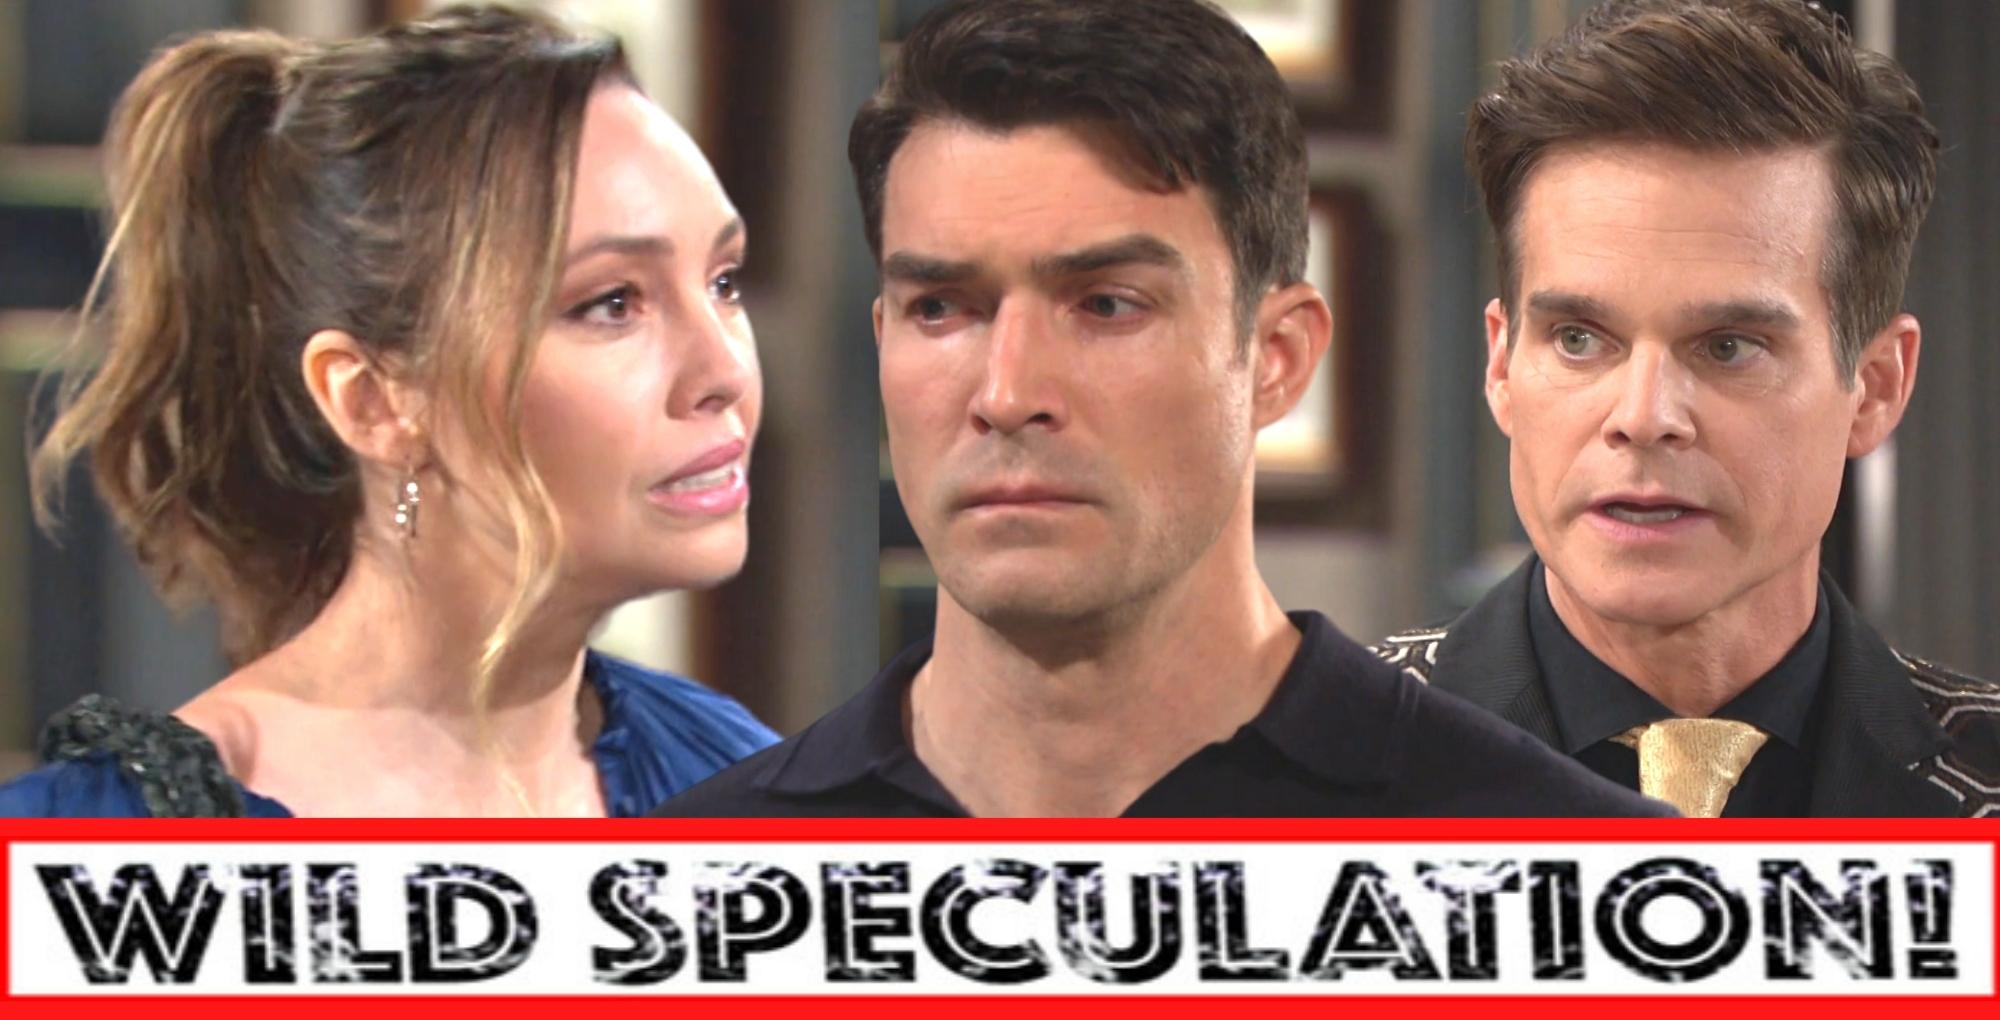 days of our lives spoilers wild speculation. three images gwen, dimitri, leo.